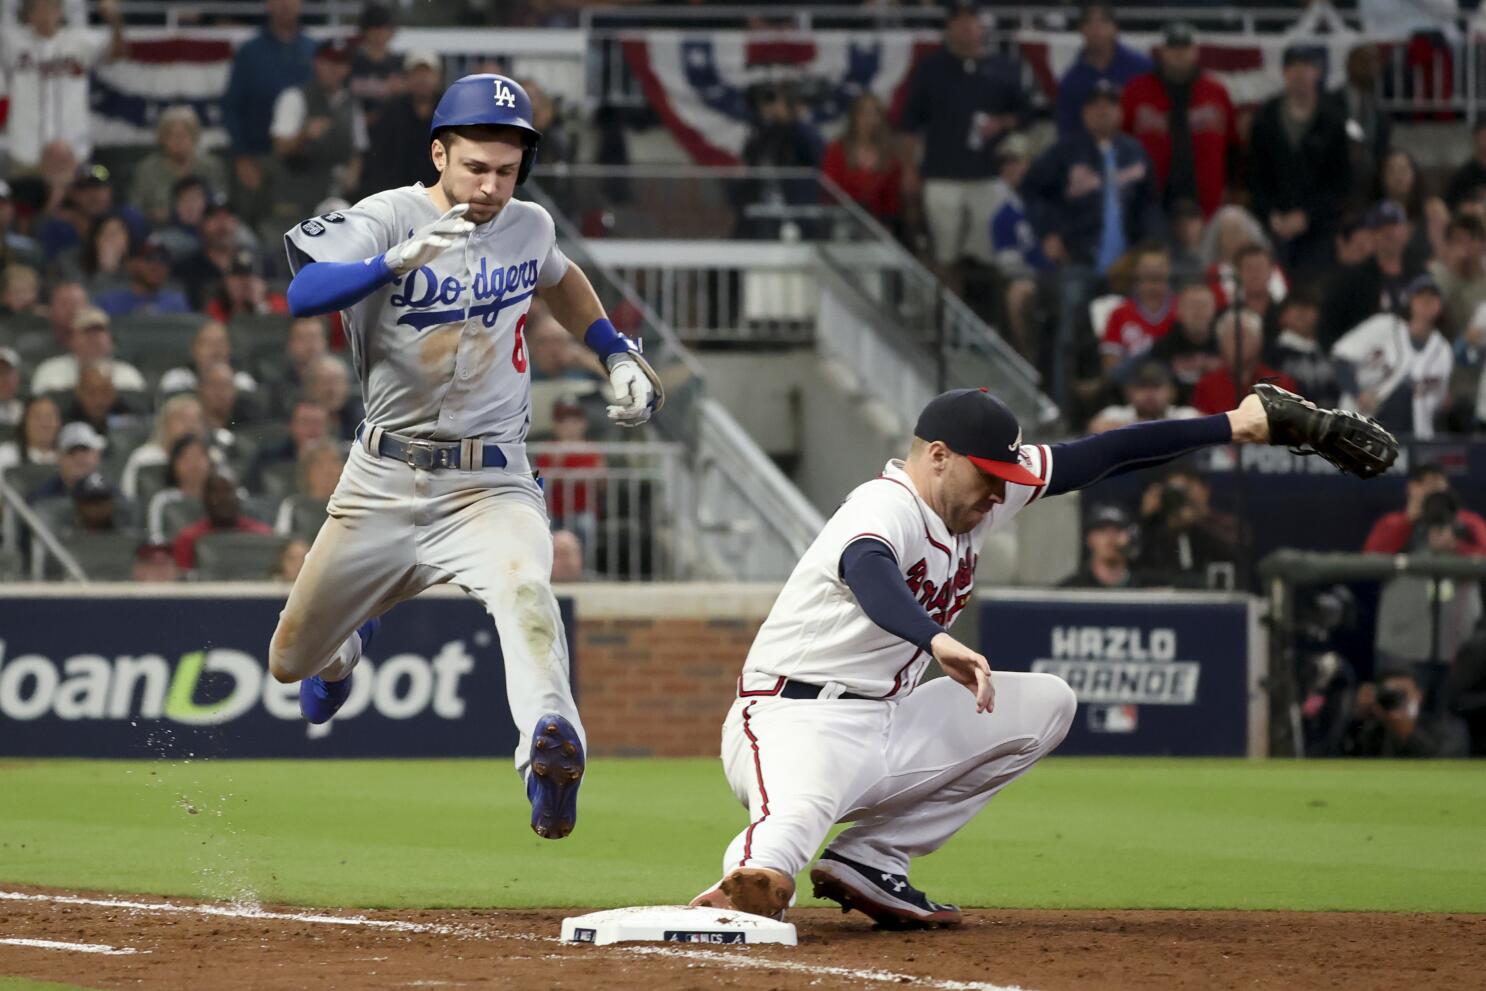 Saturday night's Braves-Dodgers Game 6 will start later